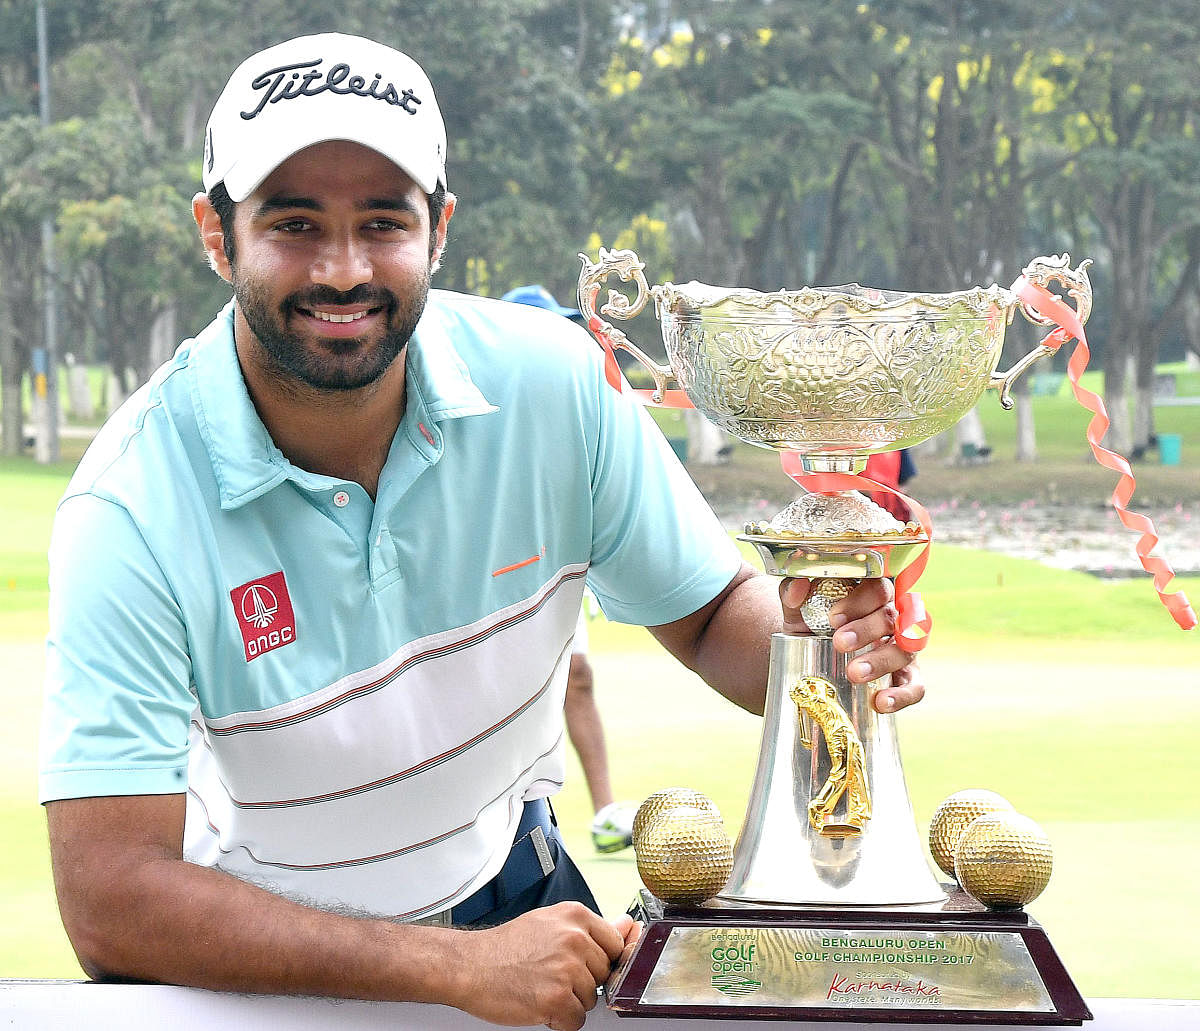 India's Abhinav Lohan with the Bengaluru Open golf championship trophy after winning the championship at KGA course in Bengaluru on Friday. Photo Srikanta Sharma R